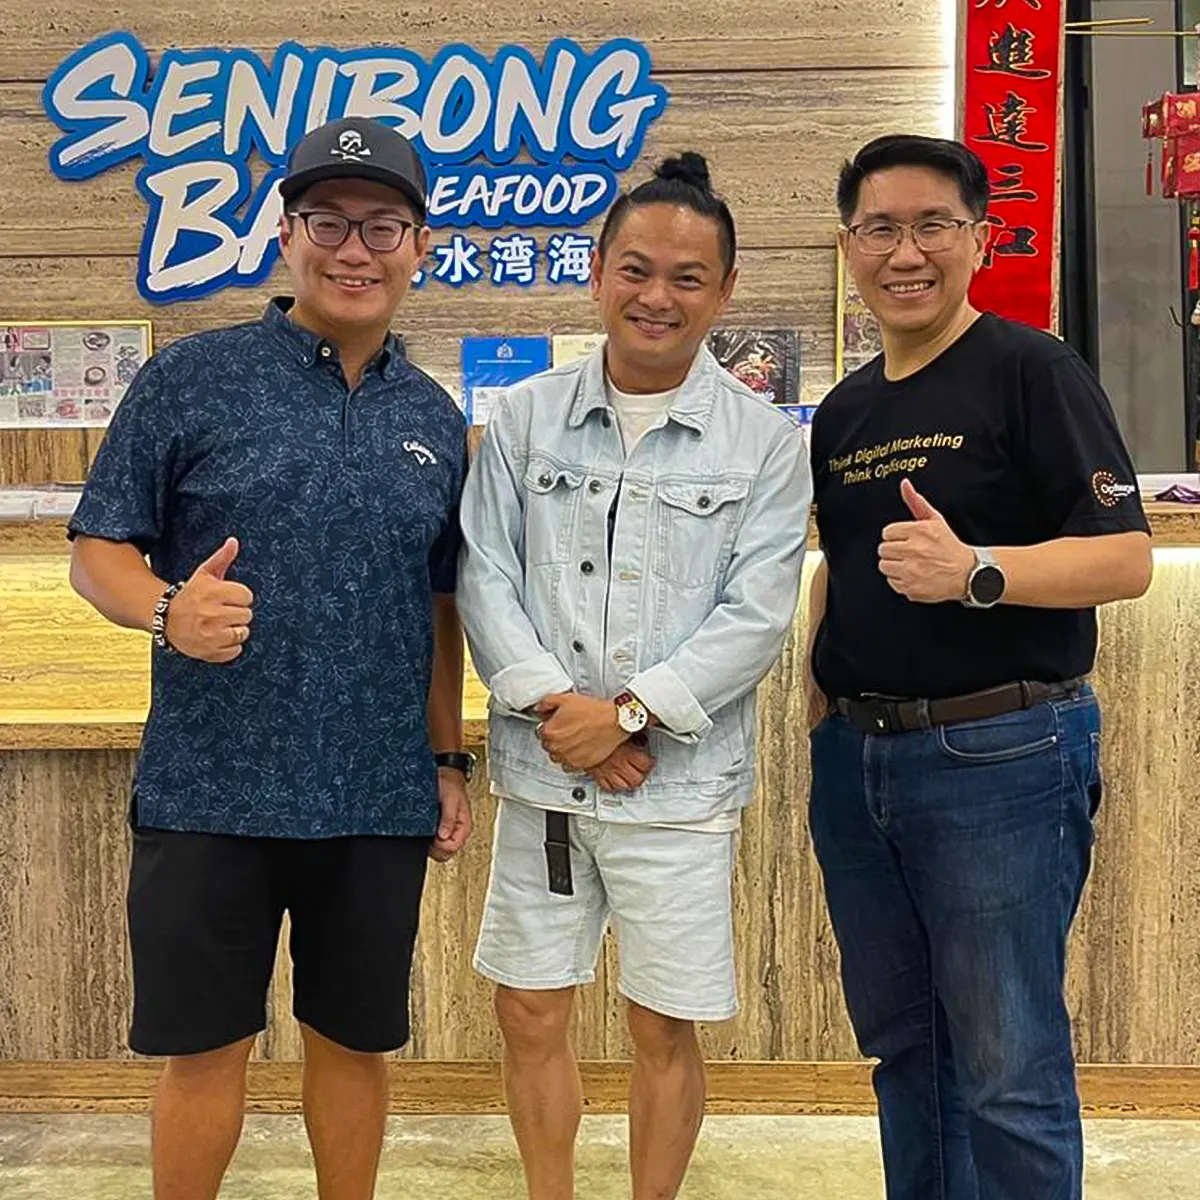 Our Satisfied Customers - Senibong Bay Seafood